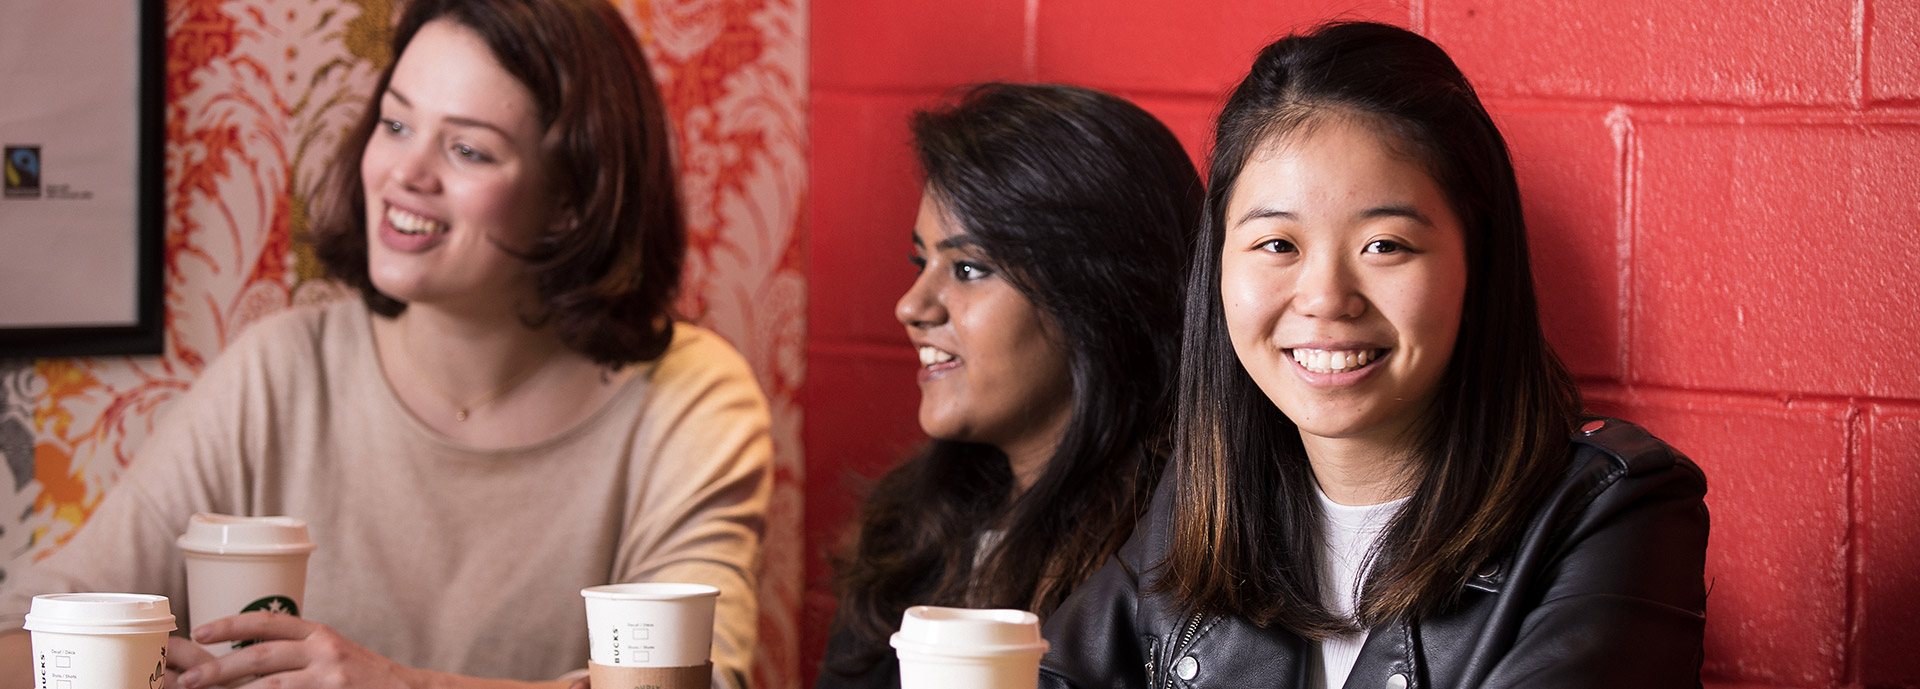 Group of international students drinking coffee